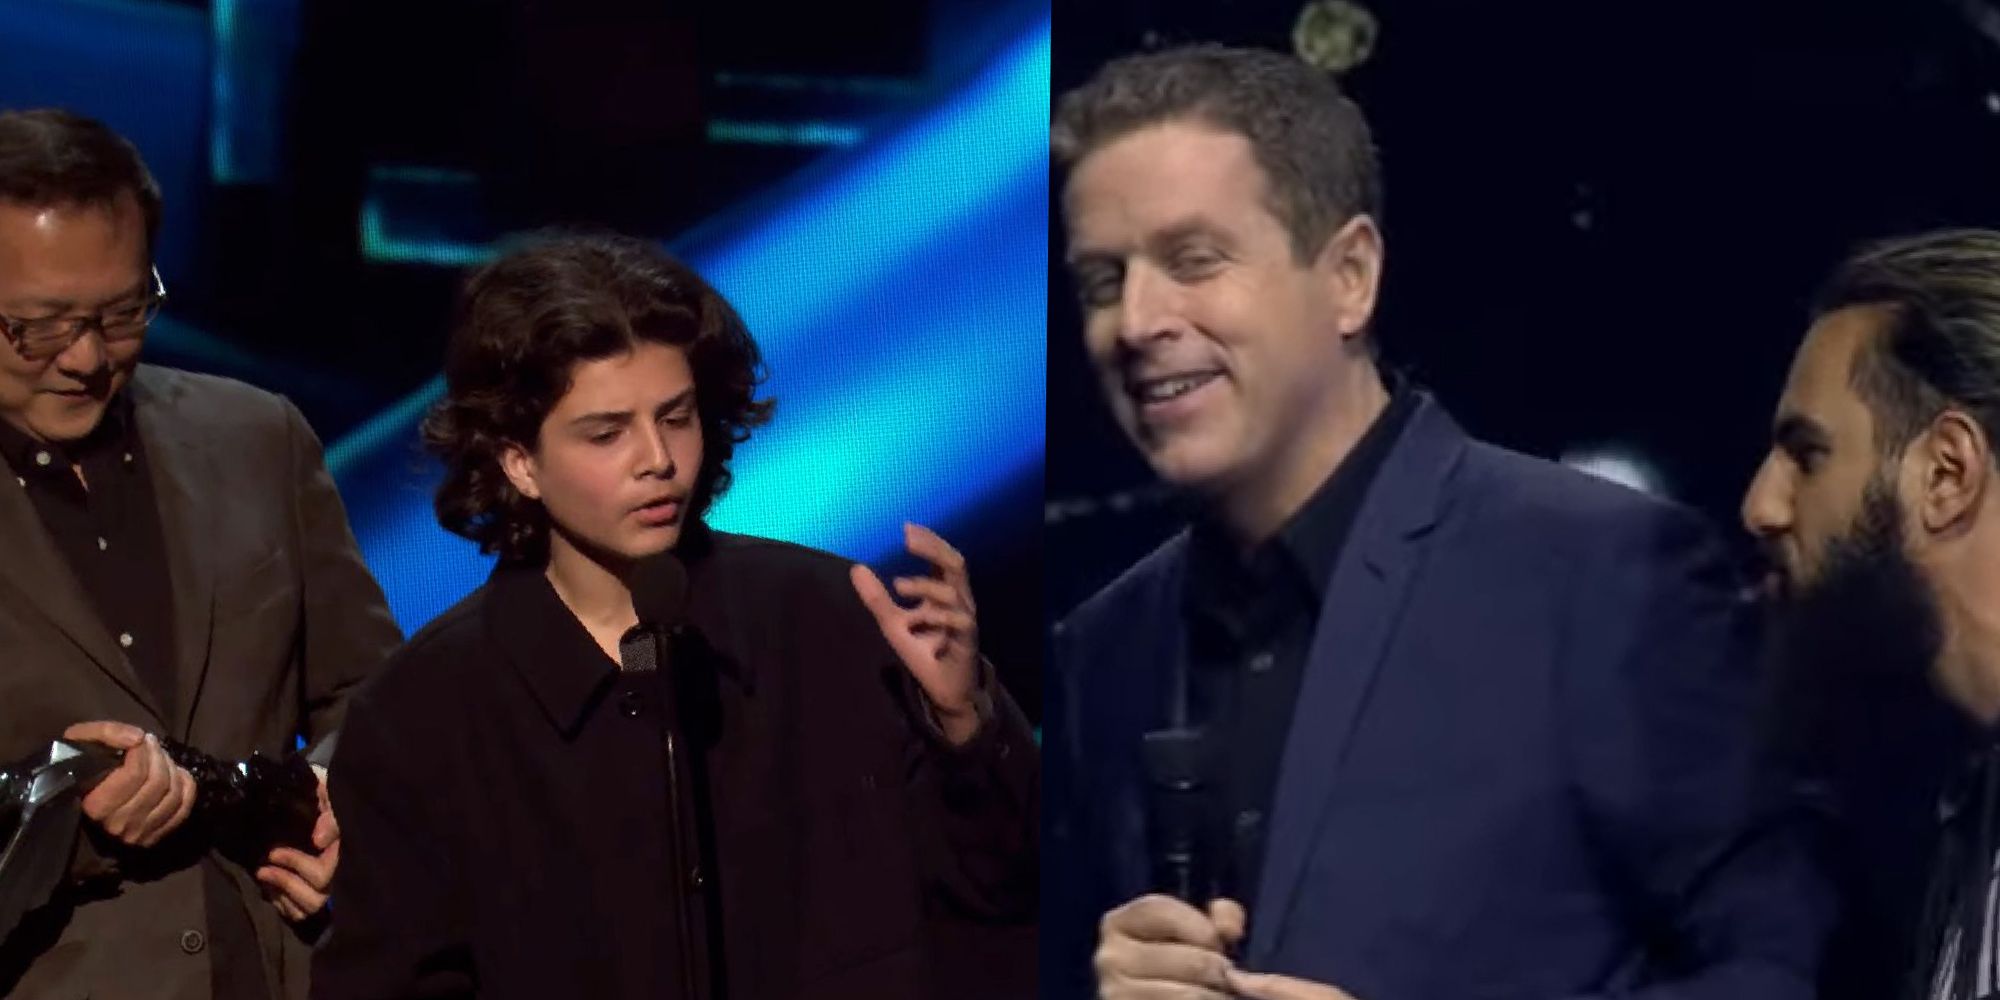 Stage Invaders at The Game Awards 2022 and Gamescom 2023